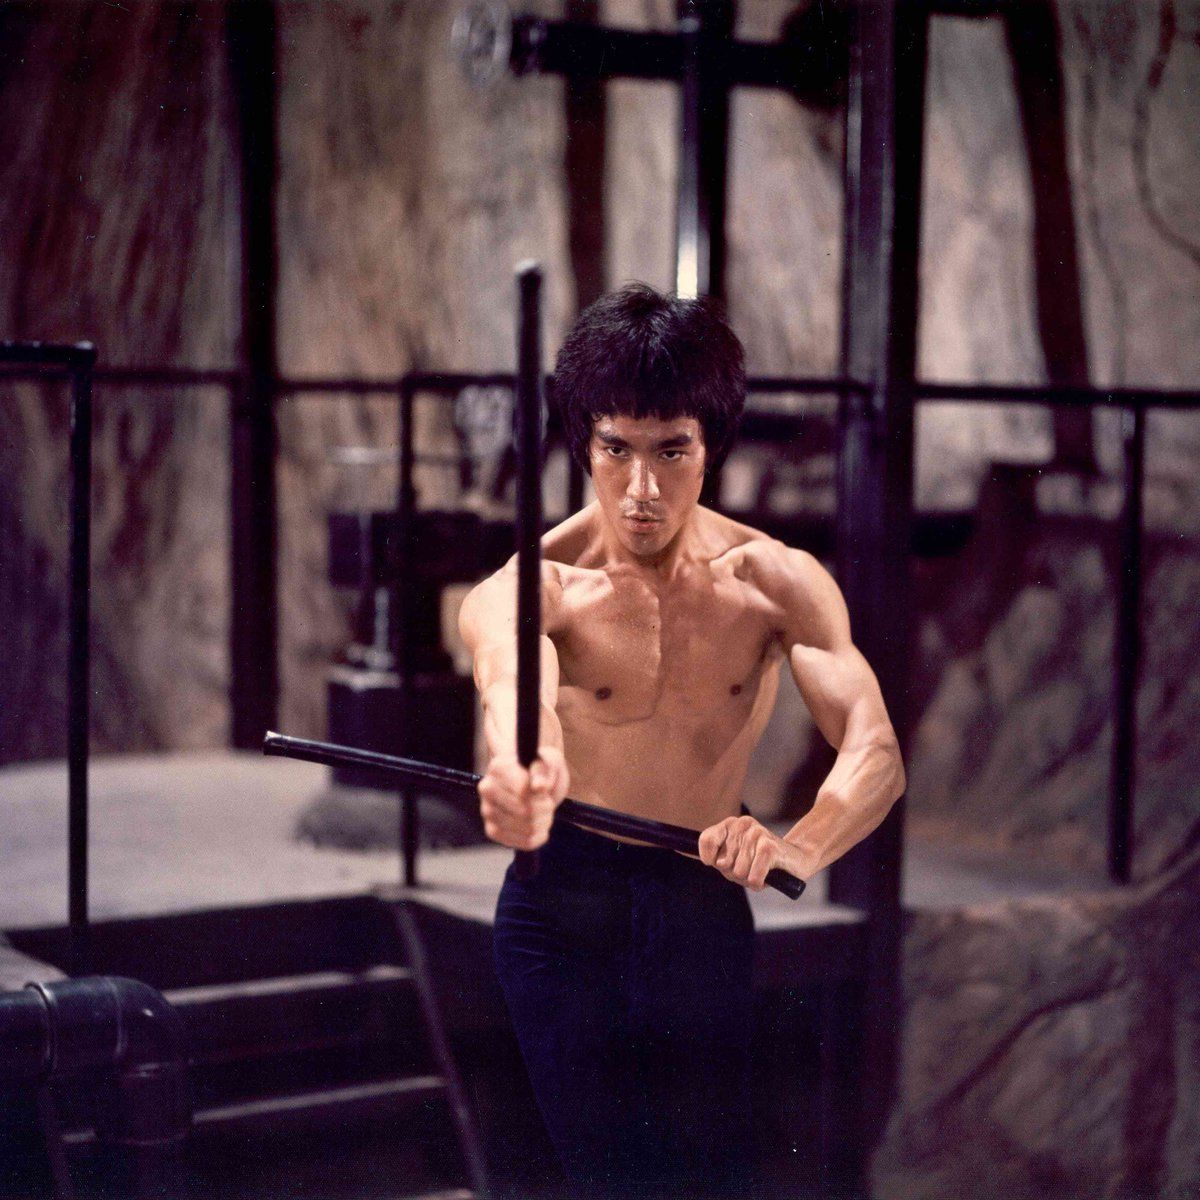 Bruce Lee died of excessive fluid consumption: Study